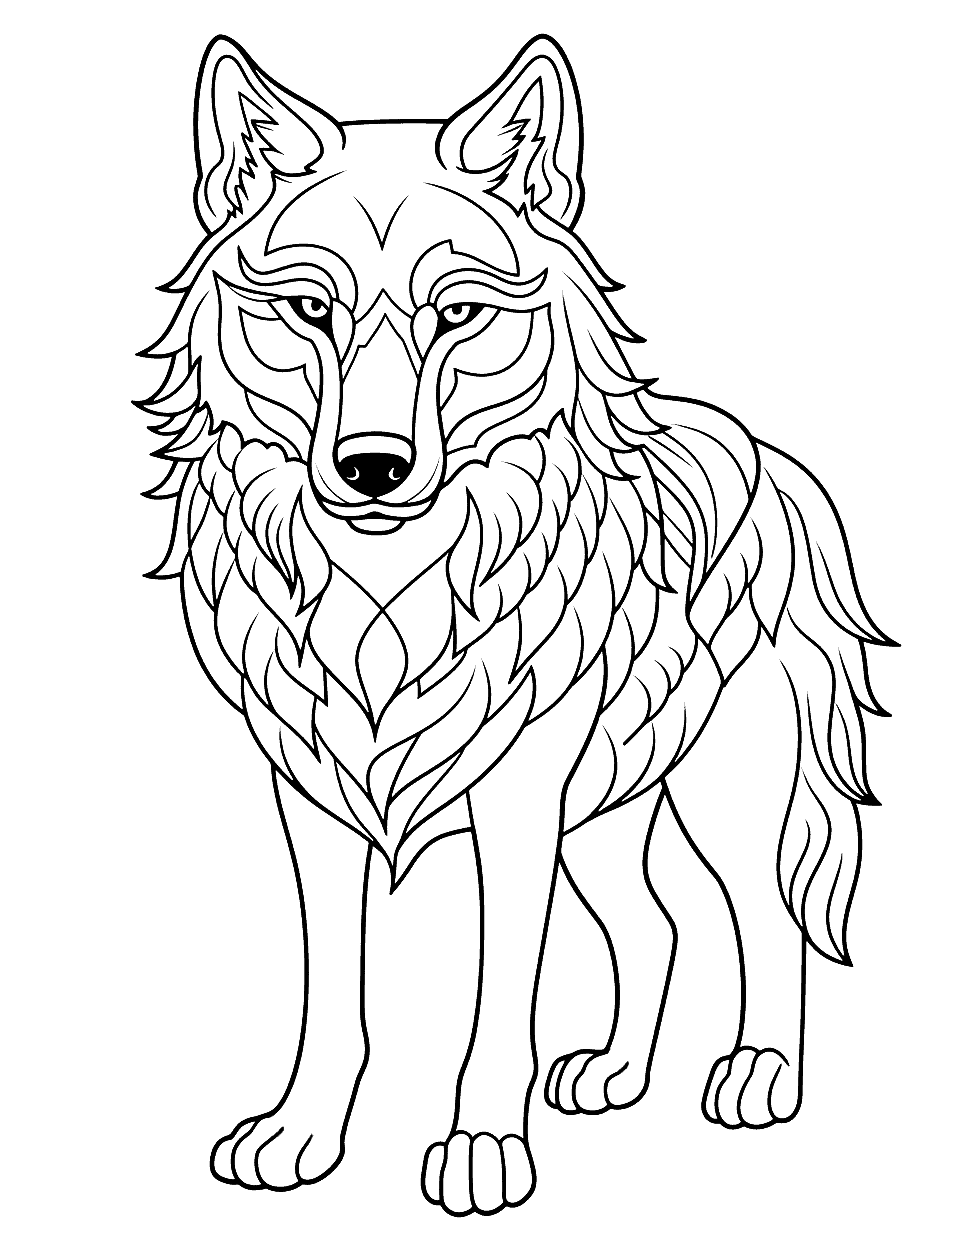 Wolf Coloring Sheet Page - A basic outline of a wolf.